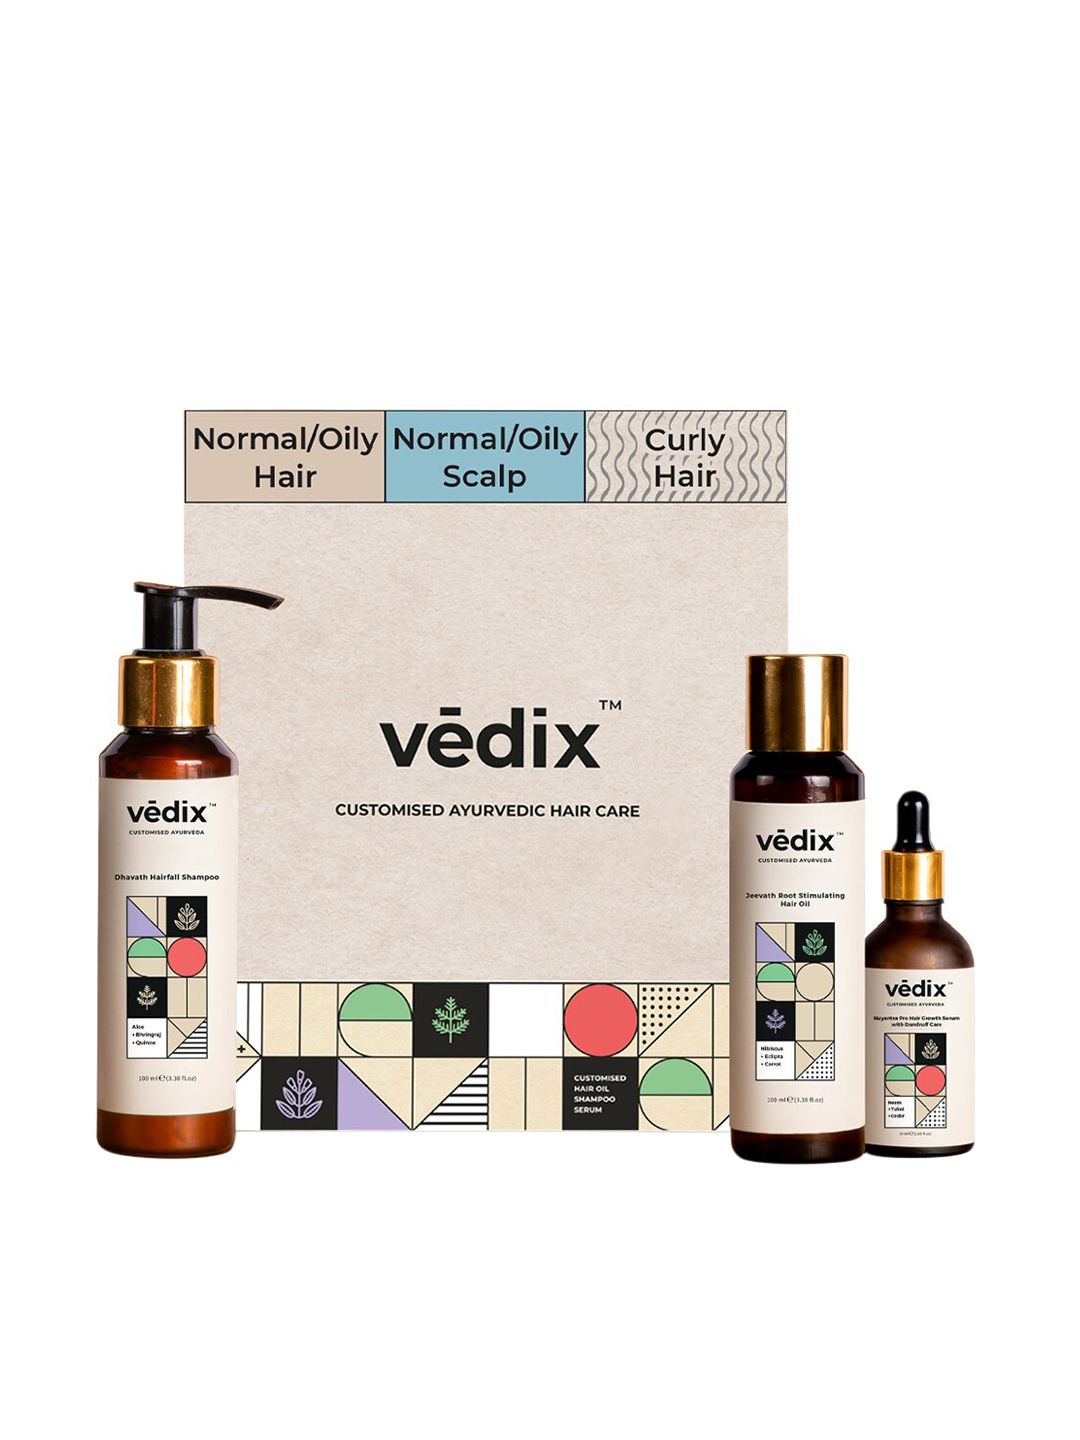 VEDIX Customized Hair Fall Control Regimen-Normal to Oily Scalp+Curly Hair with Dandruff Price in India